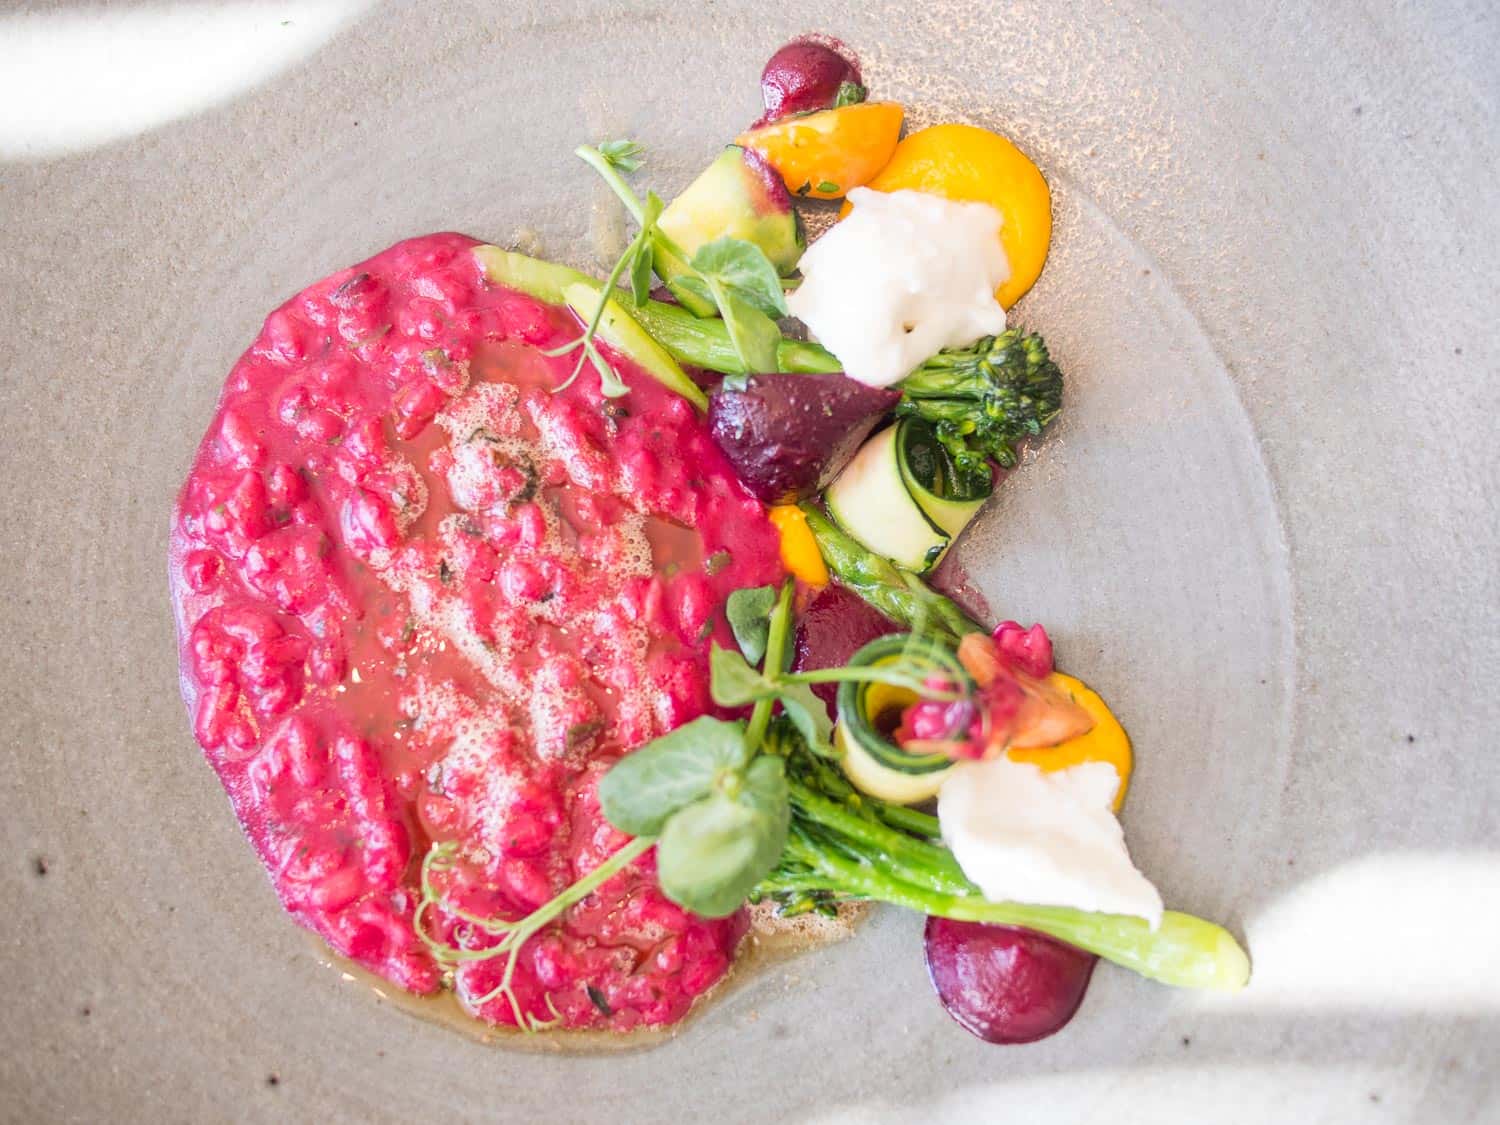 Beetroot risotto with burrata, one of the 12 dishes on the vegetarian tasting menu at La Colombe in Cape Town